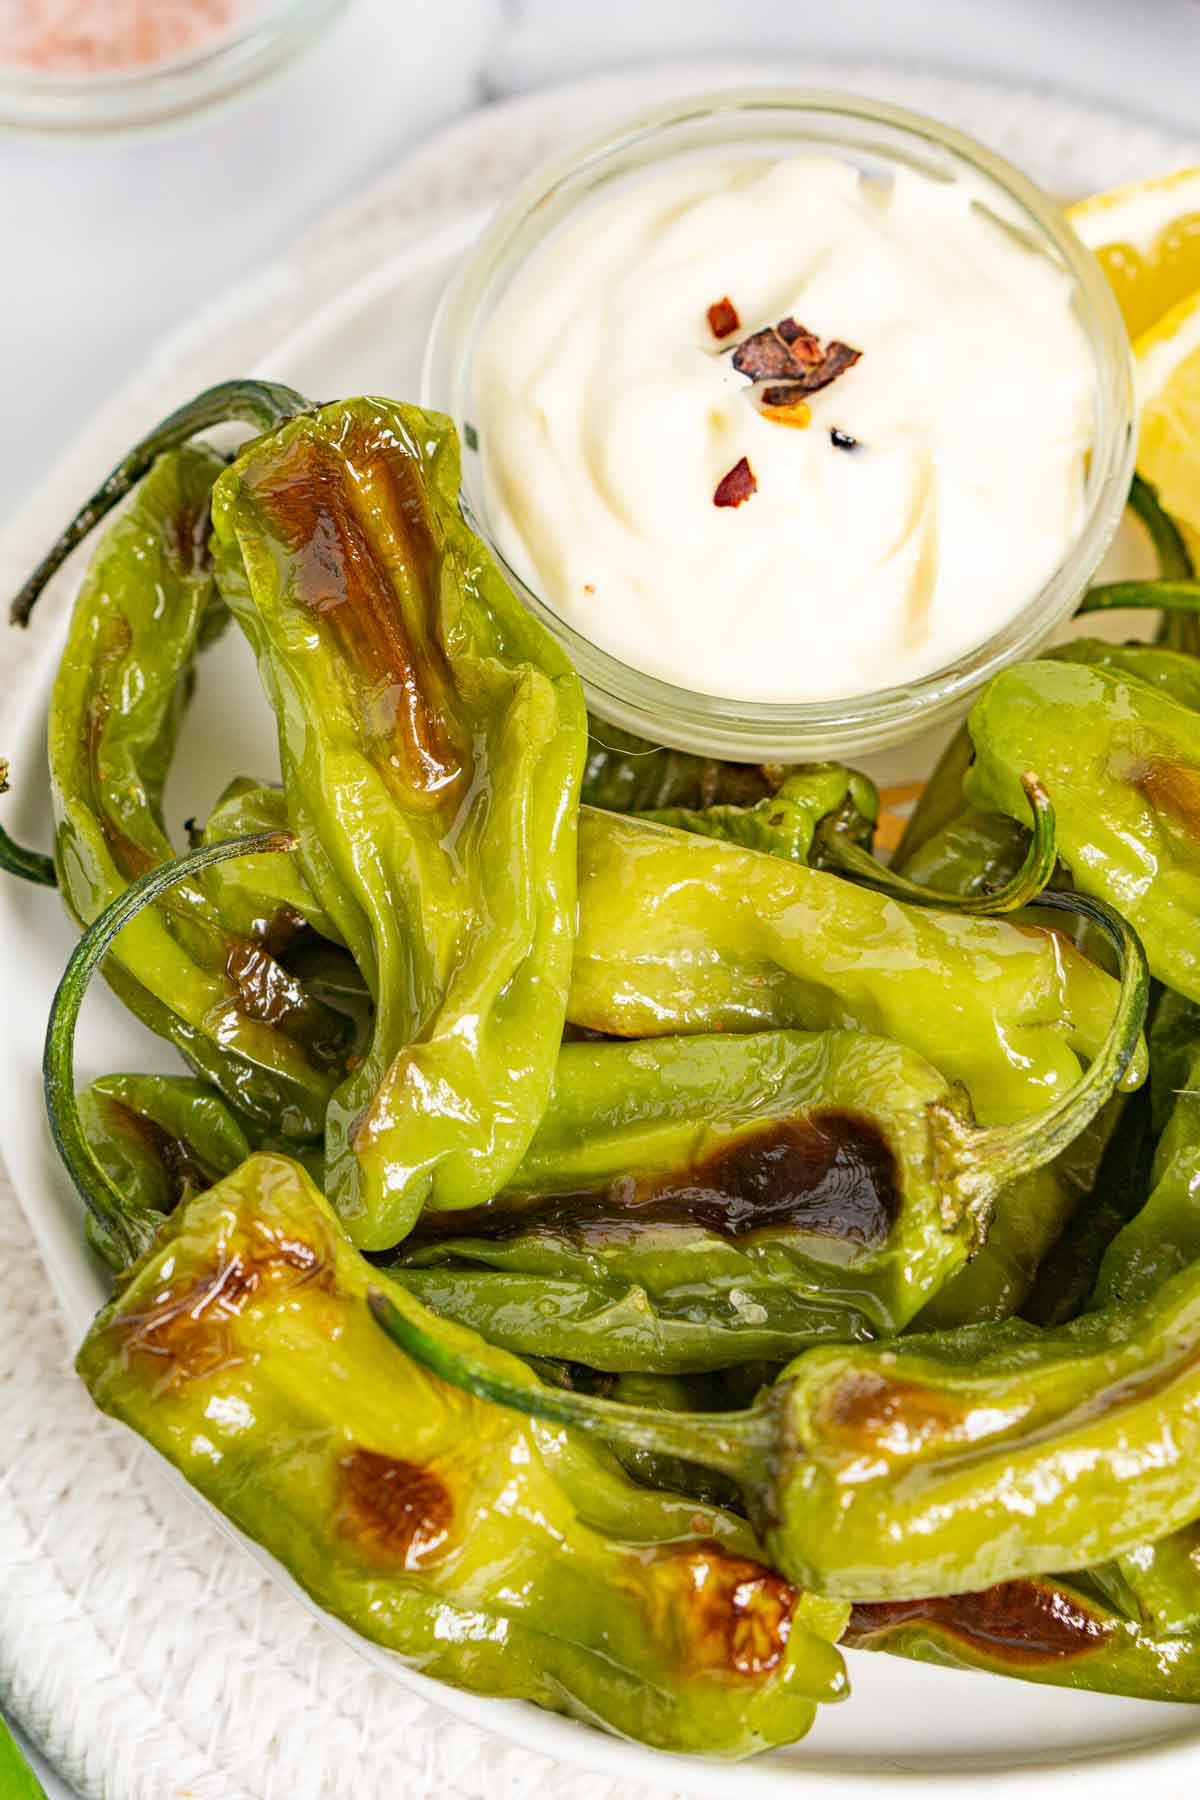 Roasted shishito peppers on a plate with truffle mayo sauce